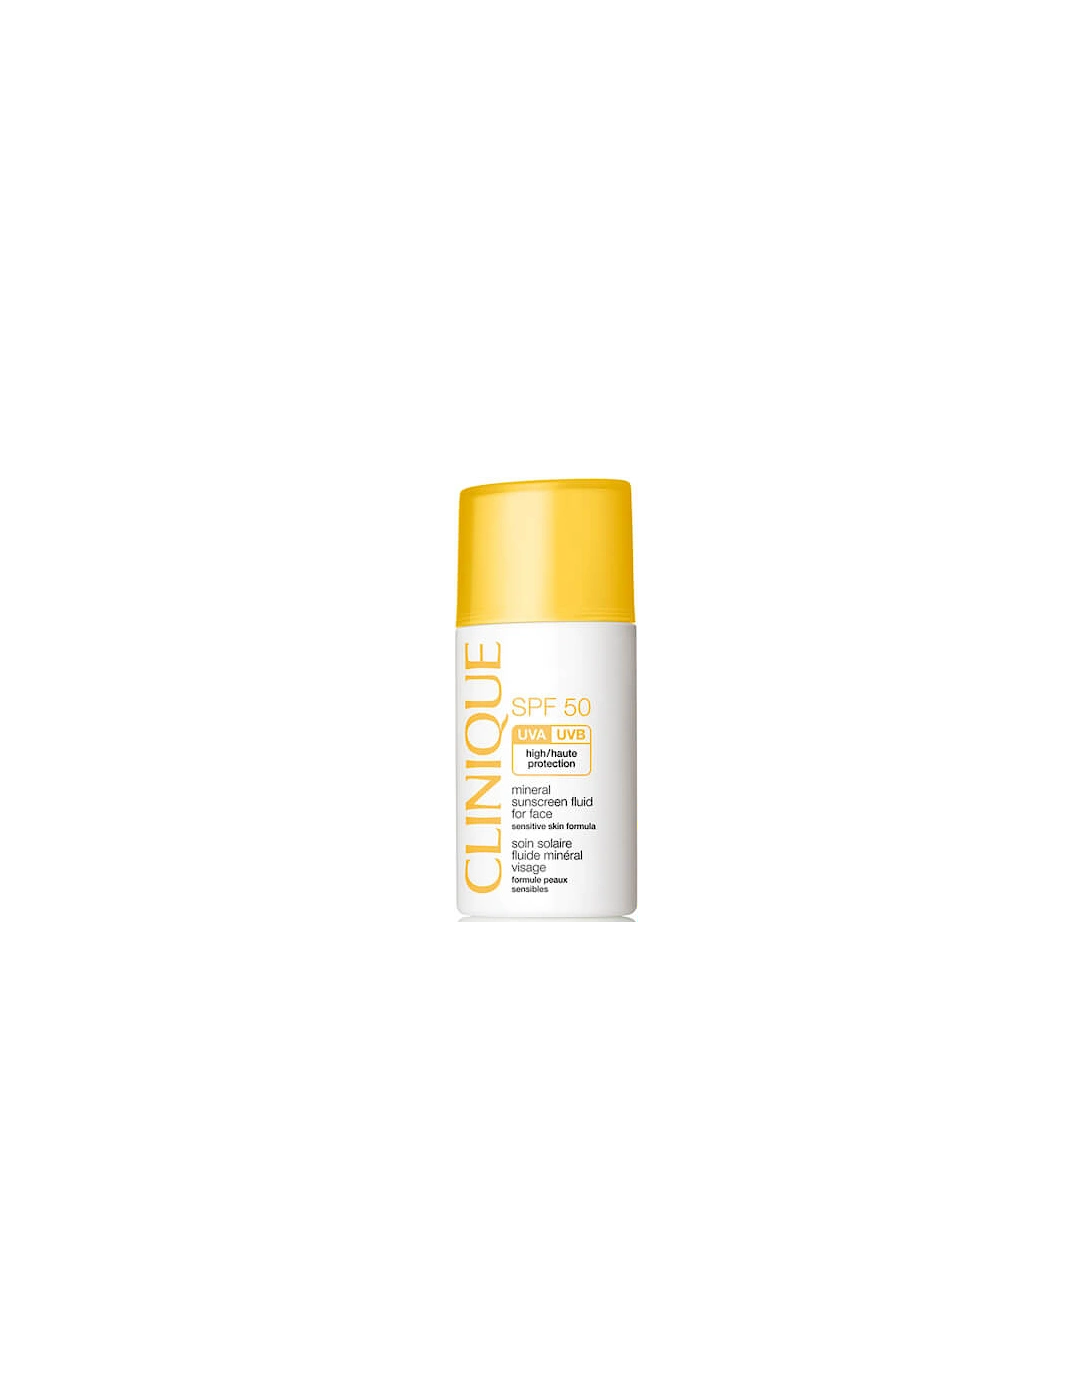 Mineral Sunscreen Fluid for Face SPF50 30ml - Clinique, 2 of 1